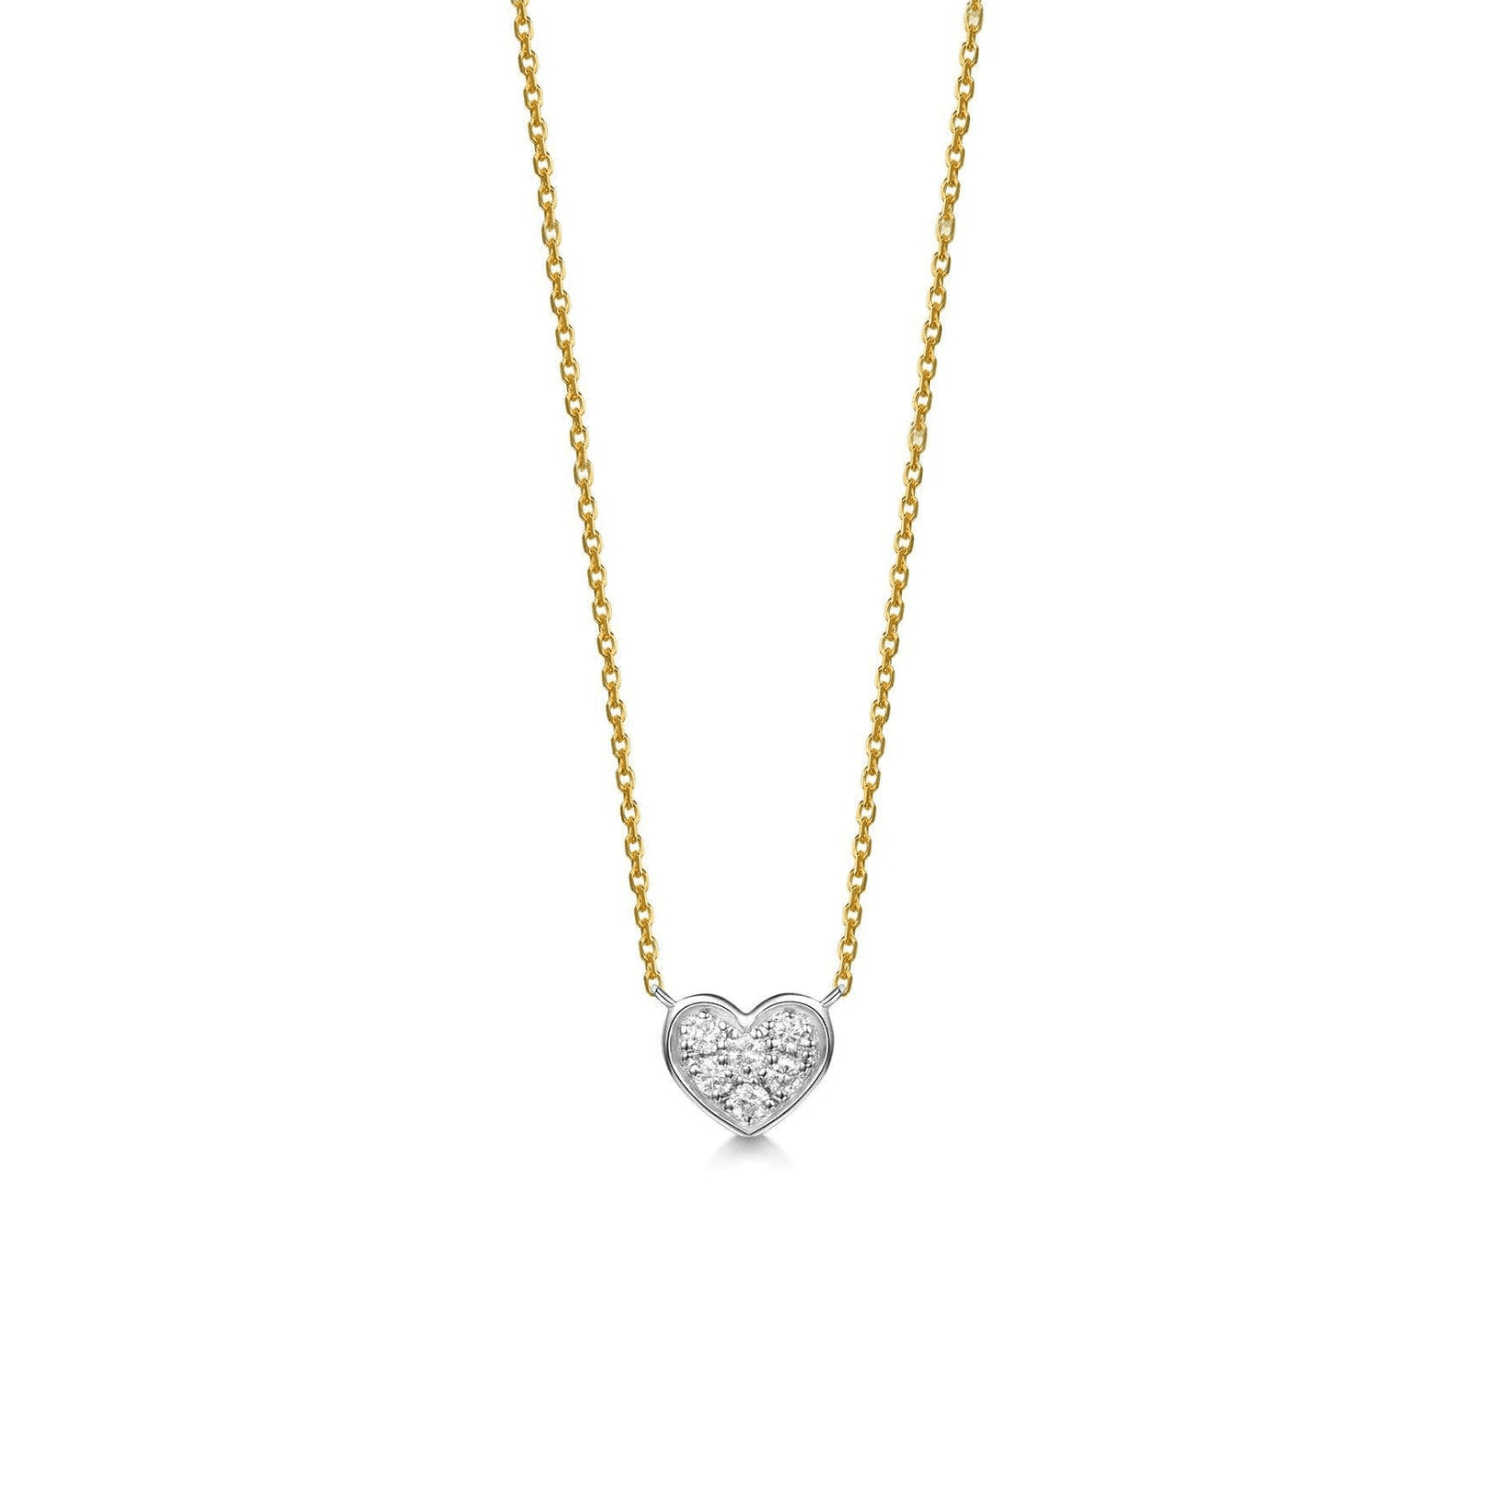 FANCIME "Full Of Love" Two Tone Heart Pave 14K Yellow Gold Necklace Main